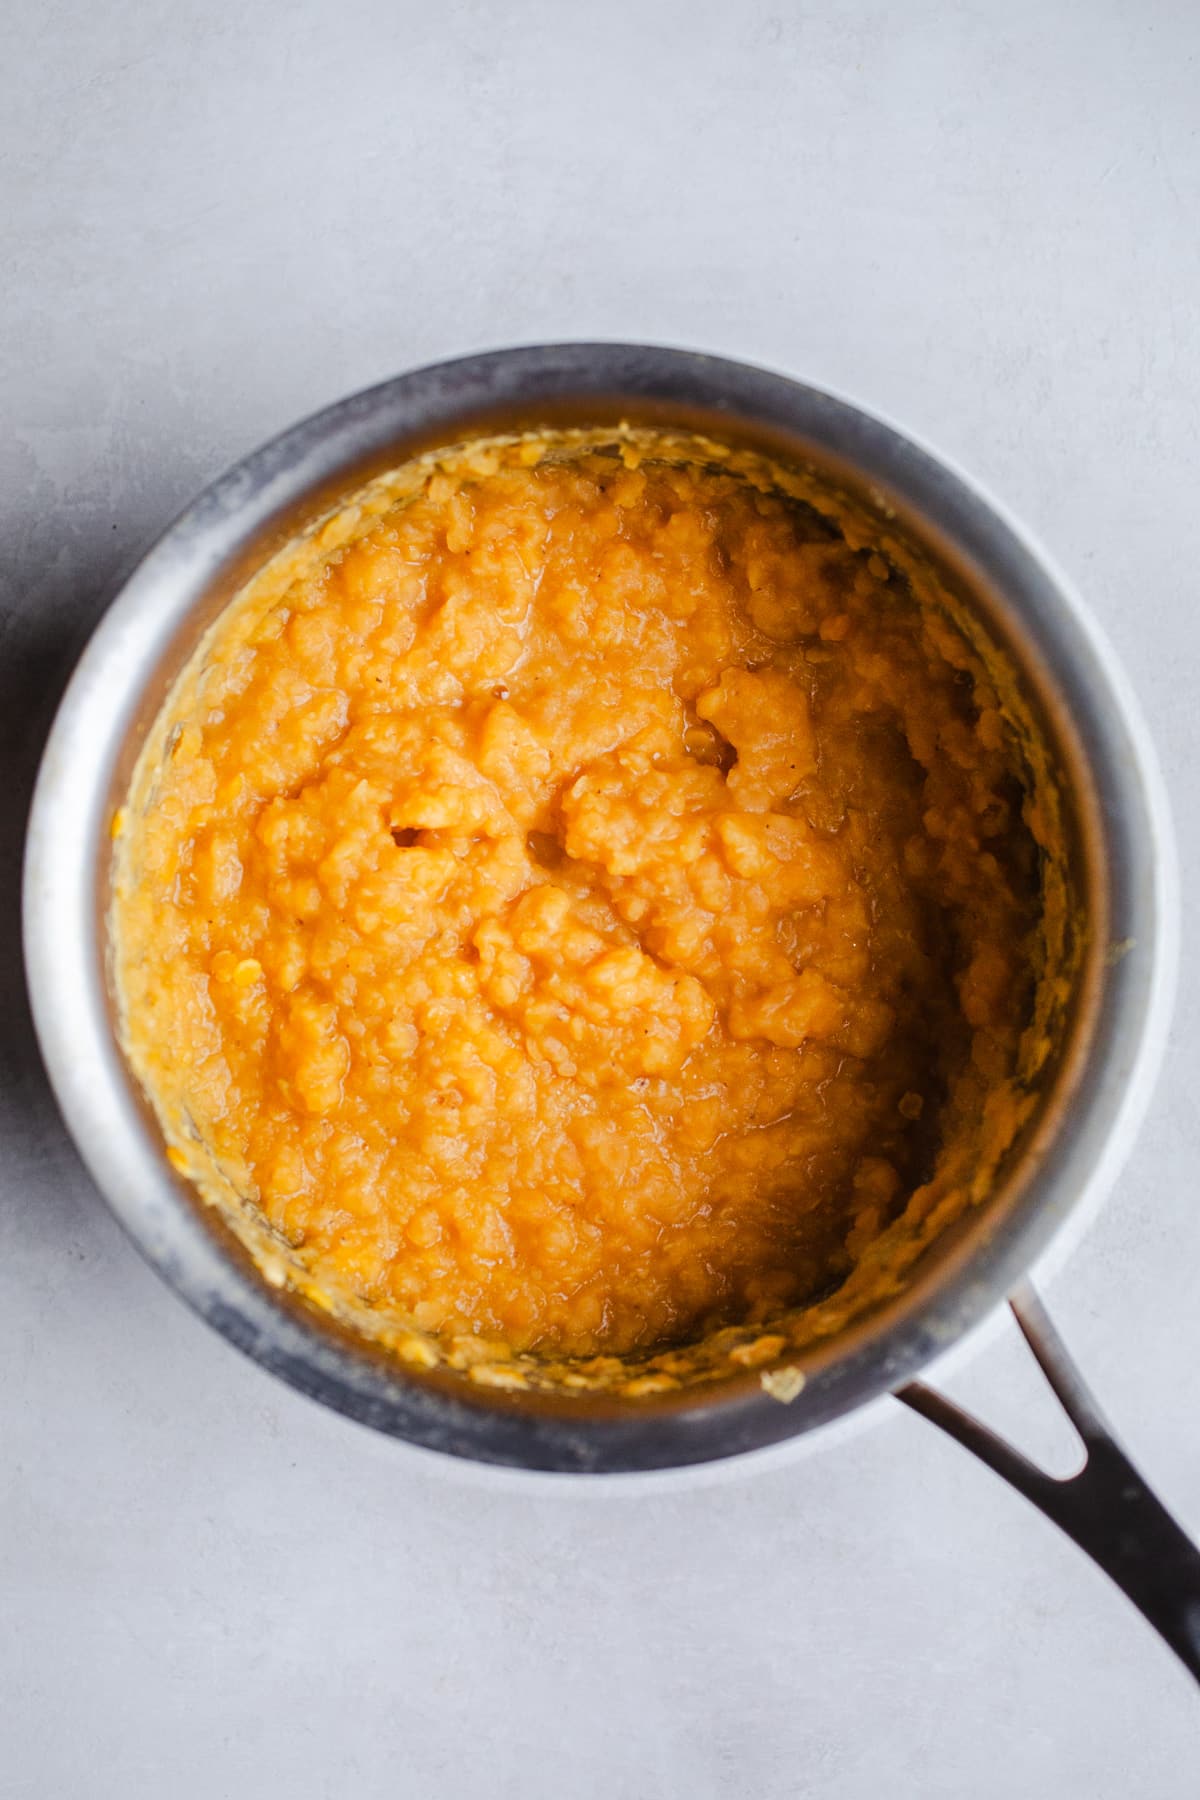 Cooked red lentils in a saucepan.